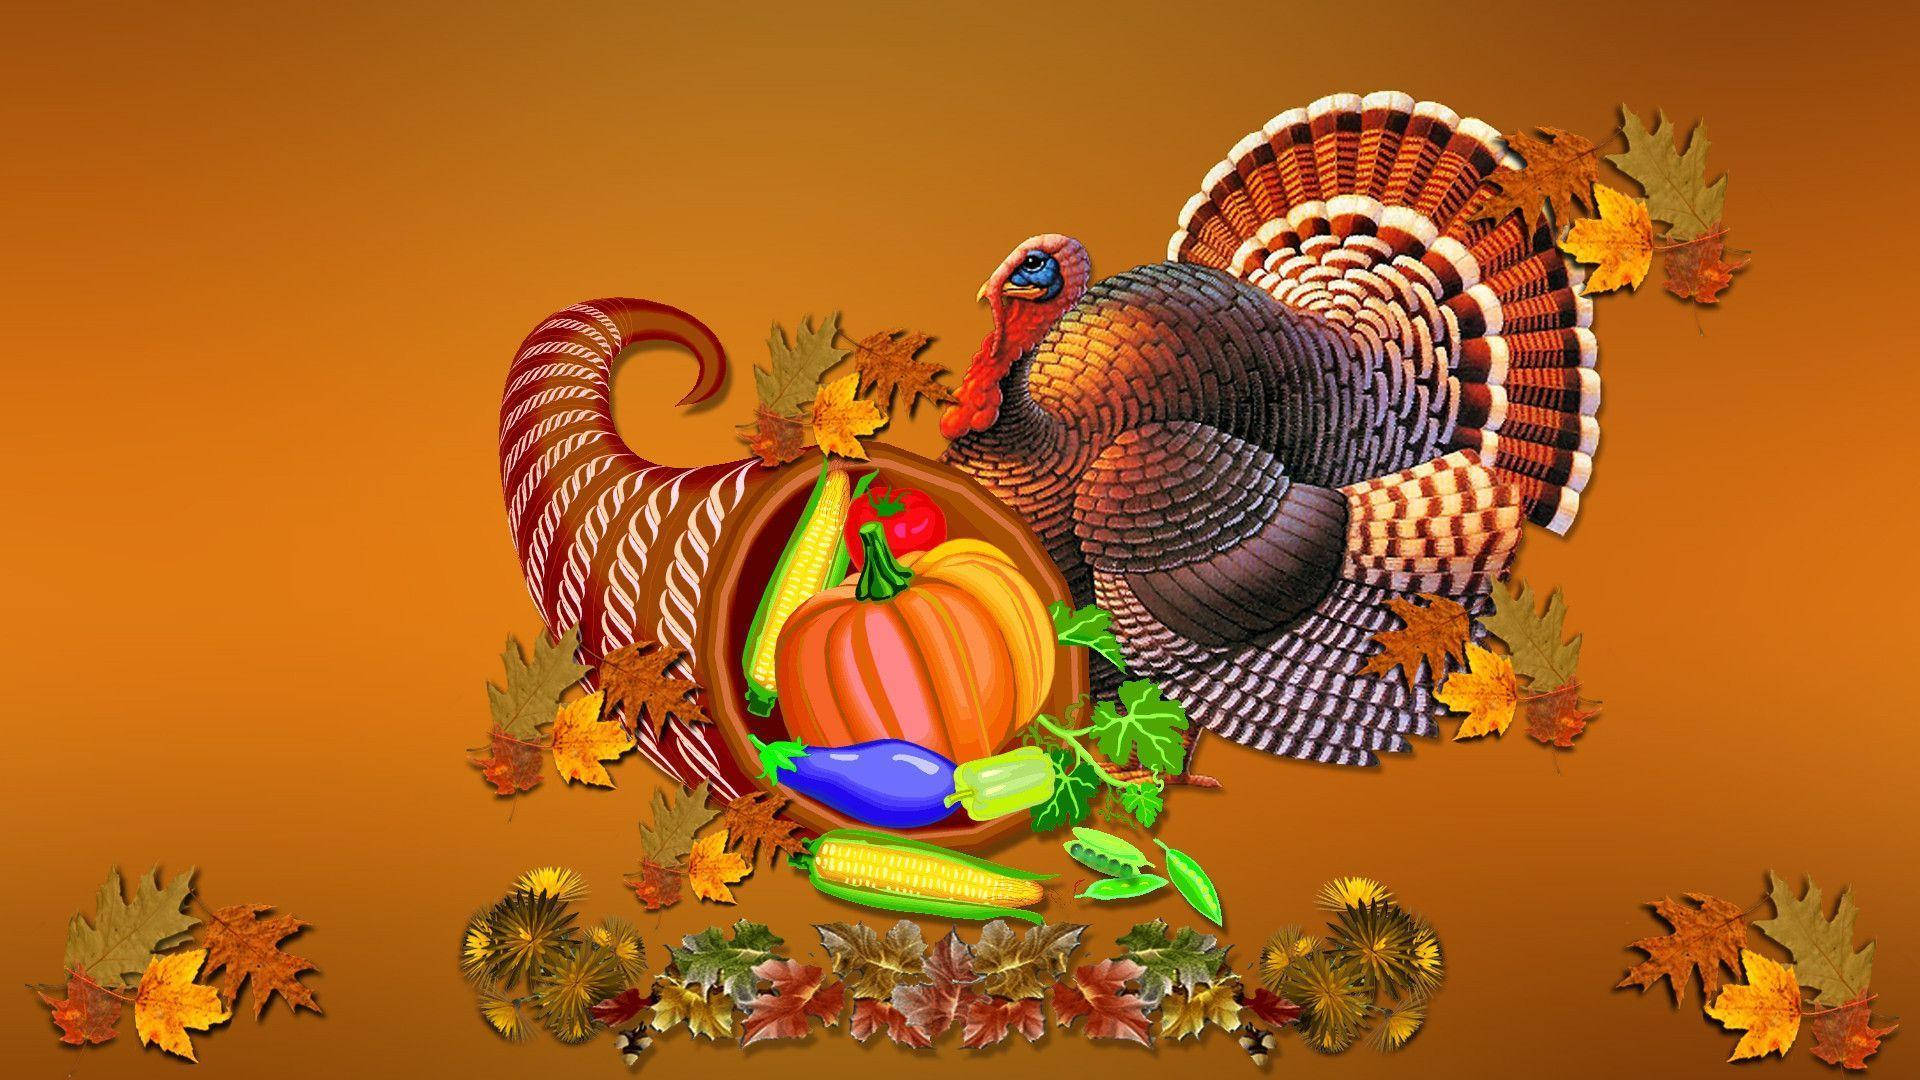 Celebrate a Happy Thanksgiving with a Delicious Turkey Wallpaper